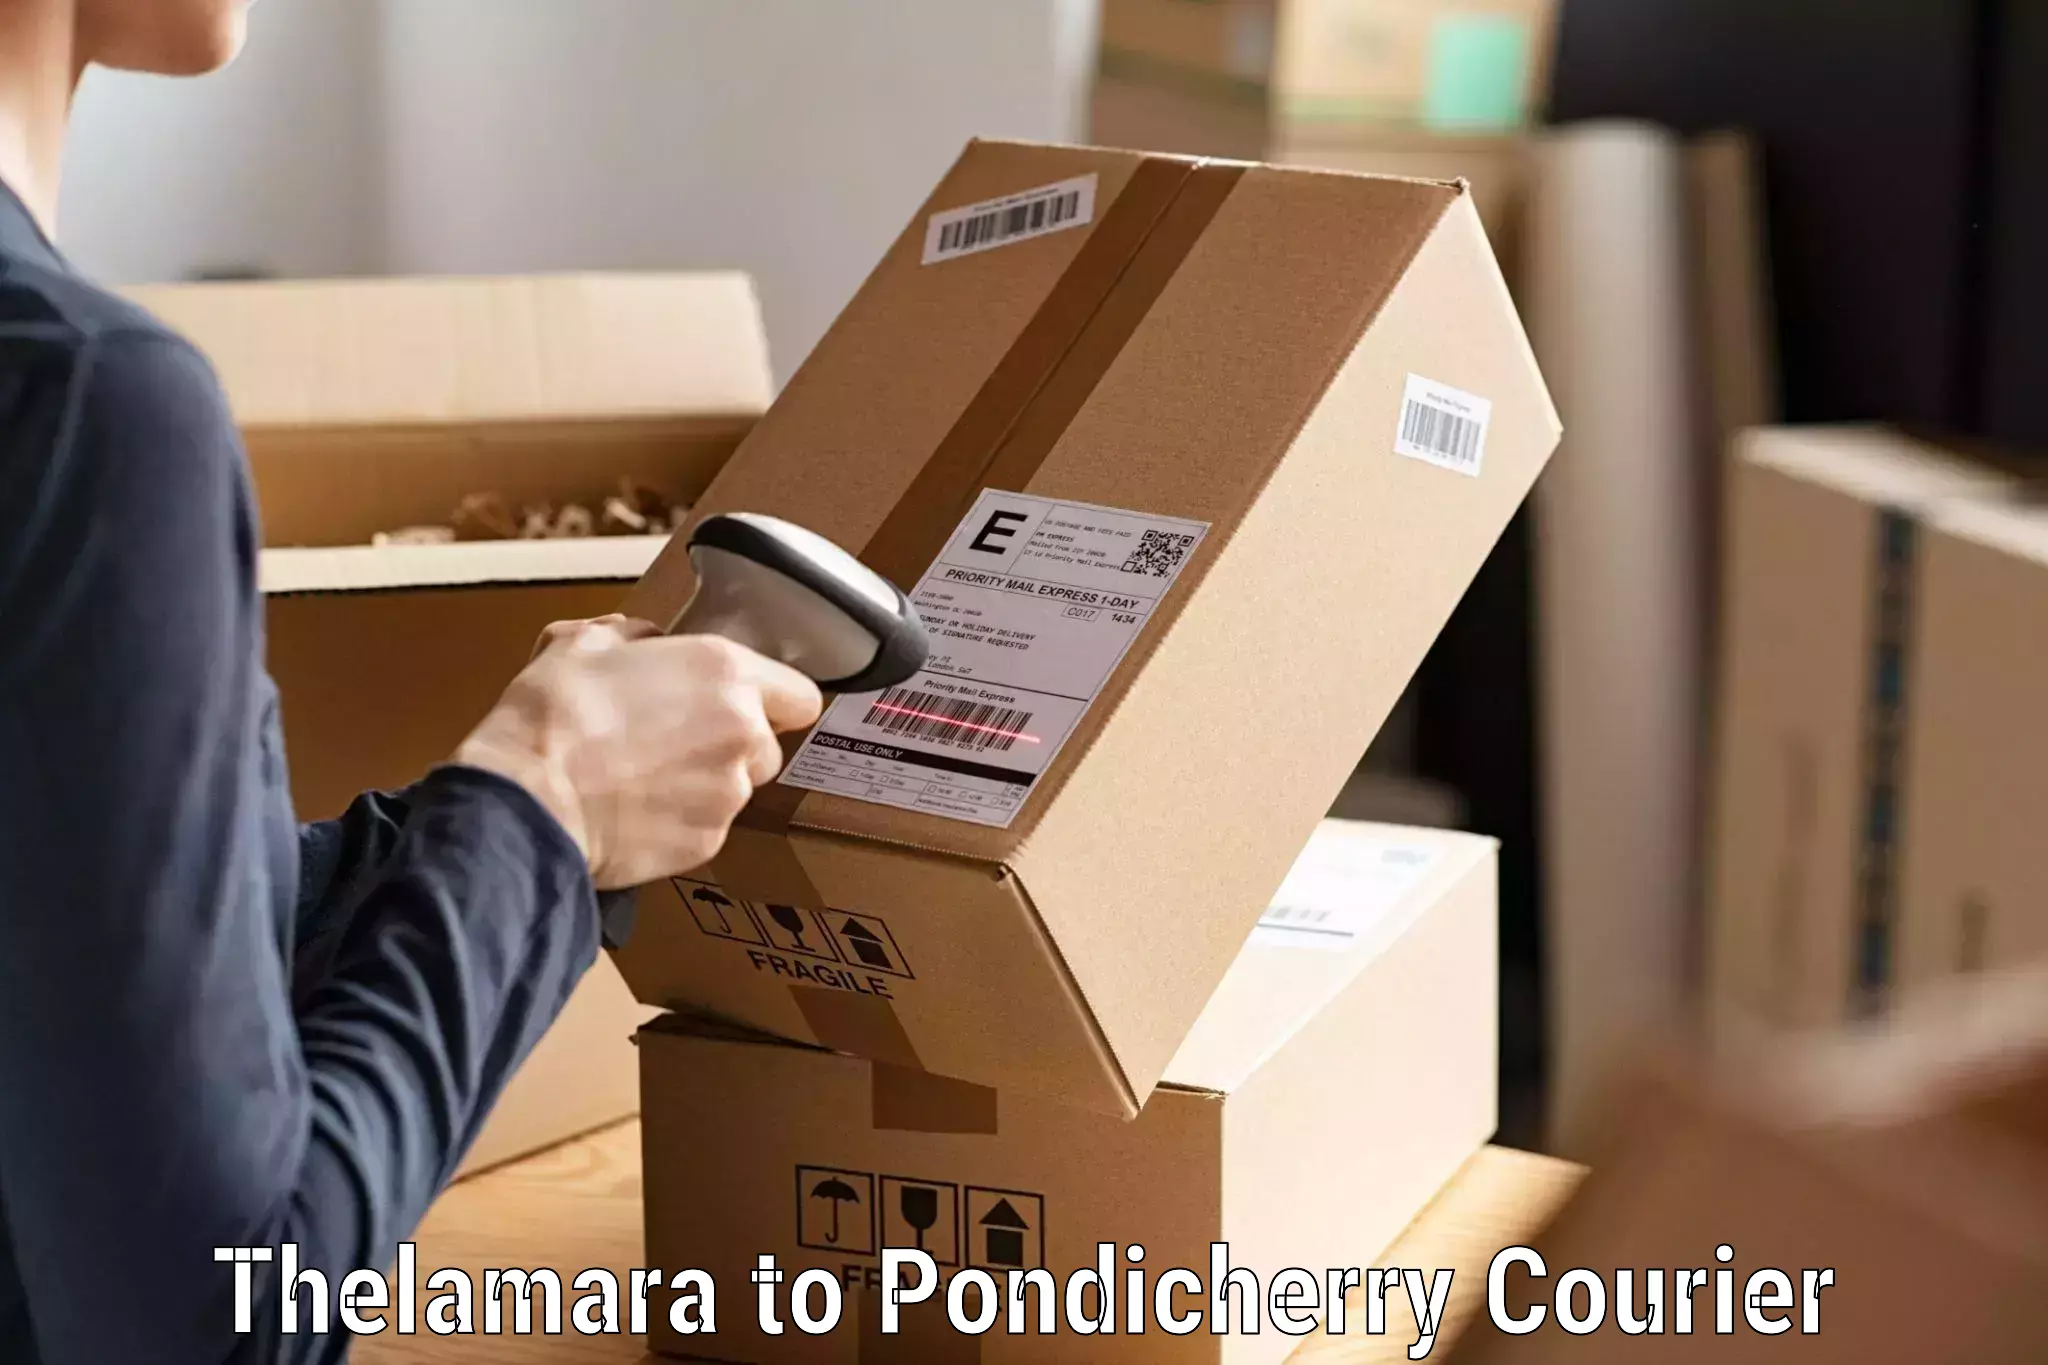 Personal courier services Thelamara to Pondicherry University